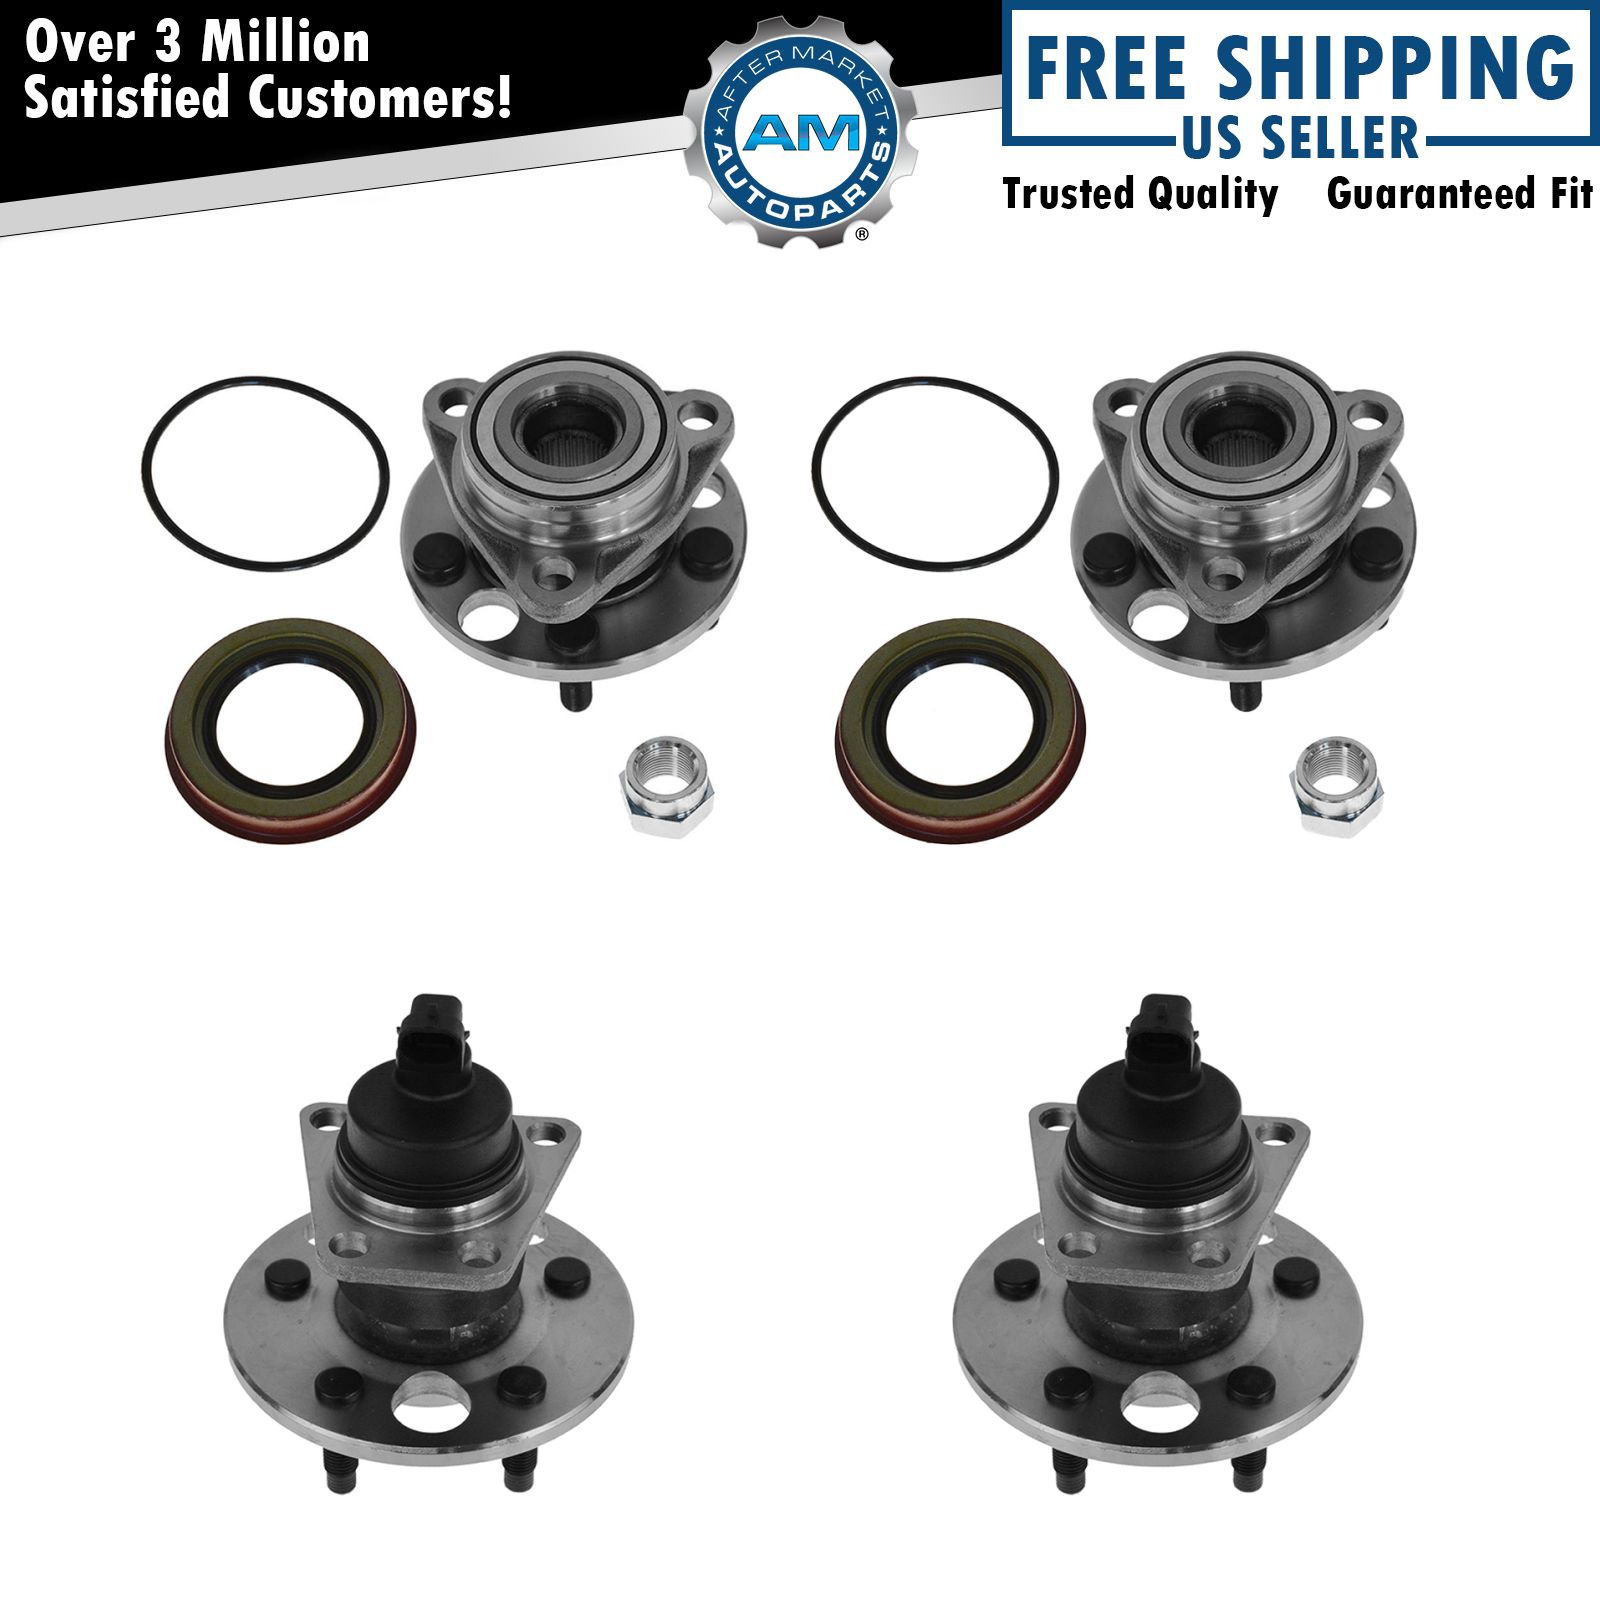 Front & Rear Wheel Hub & Bearing Kit Set of 4 for Buick Chevy Olds Pontiac